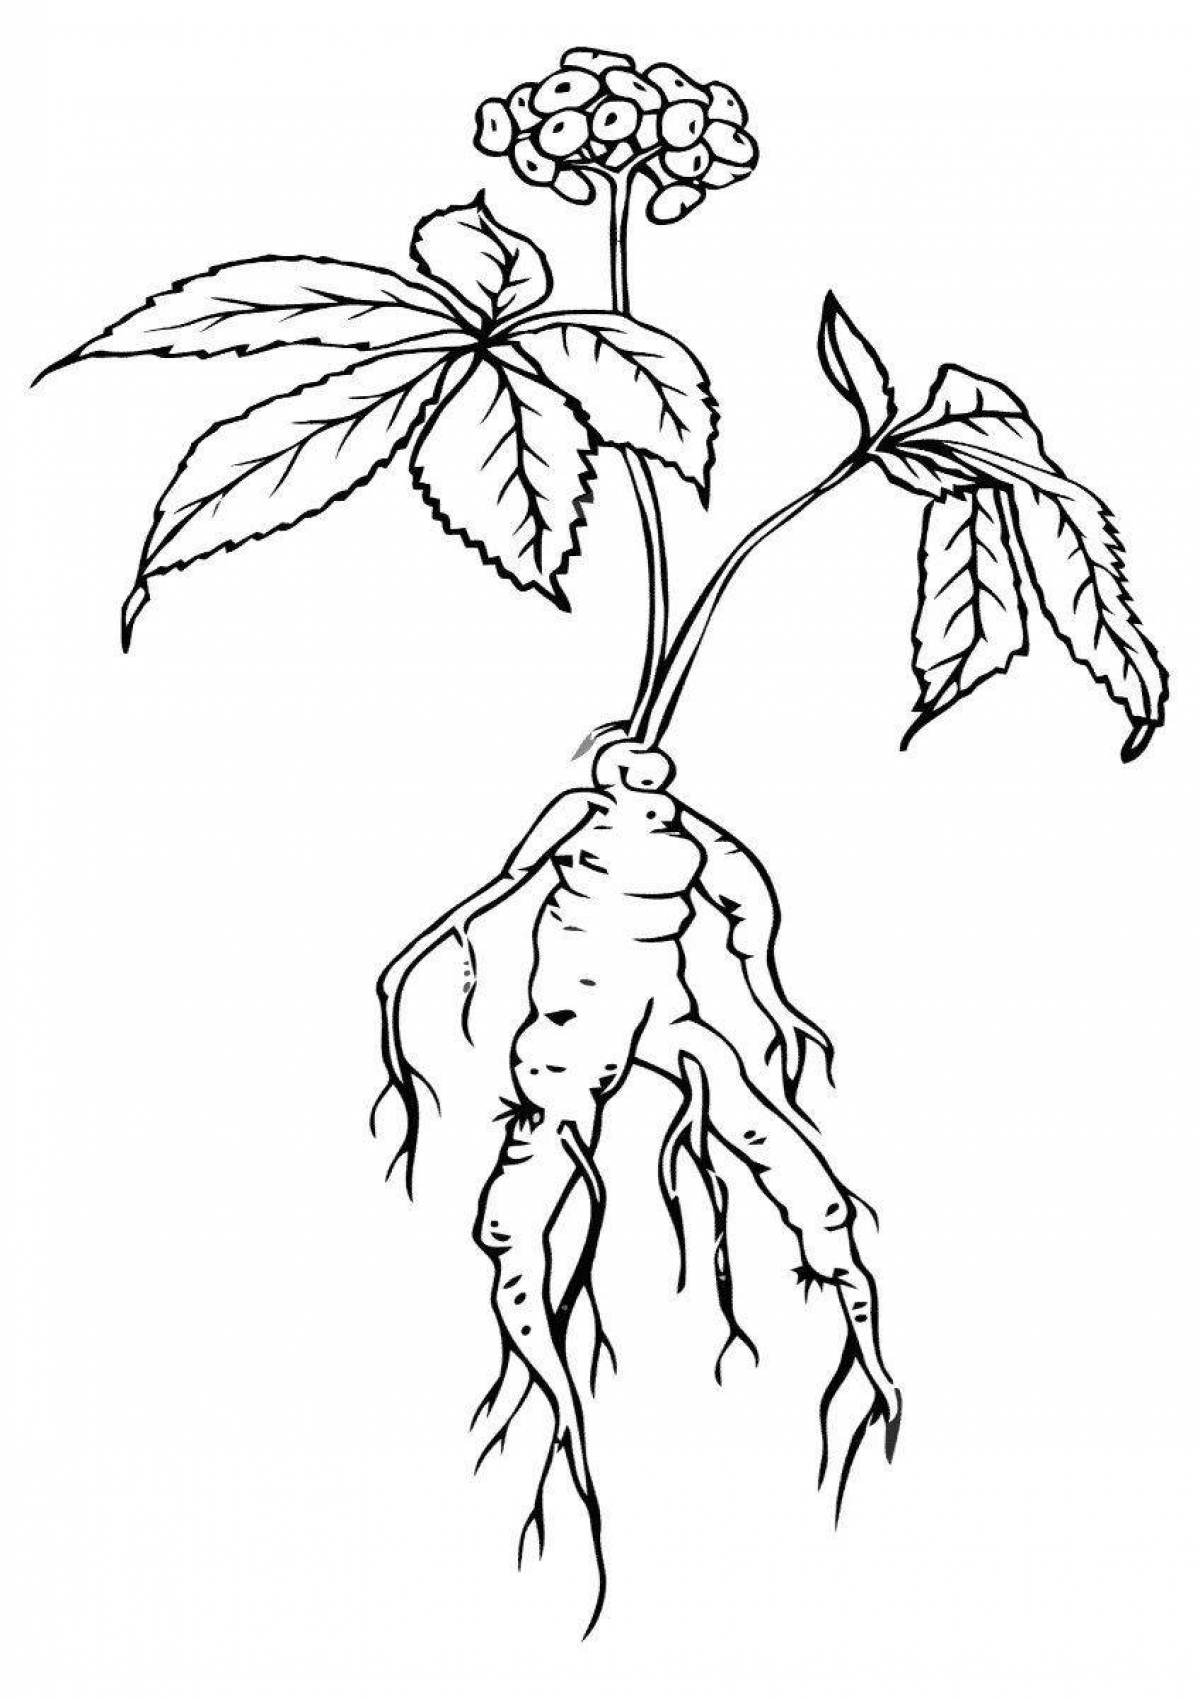 Sweet ginseng coloring page